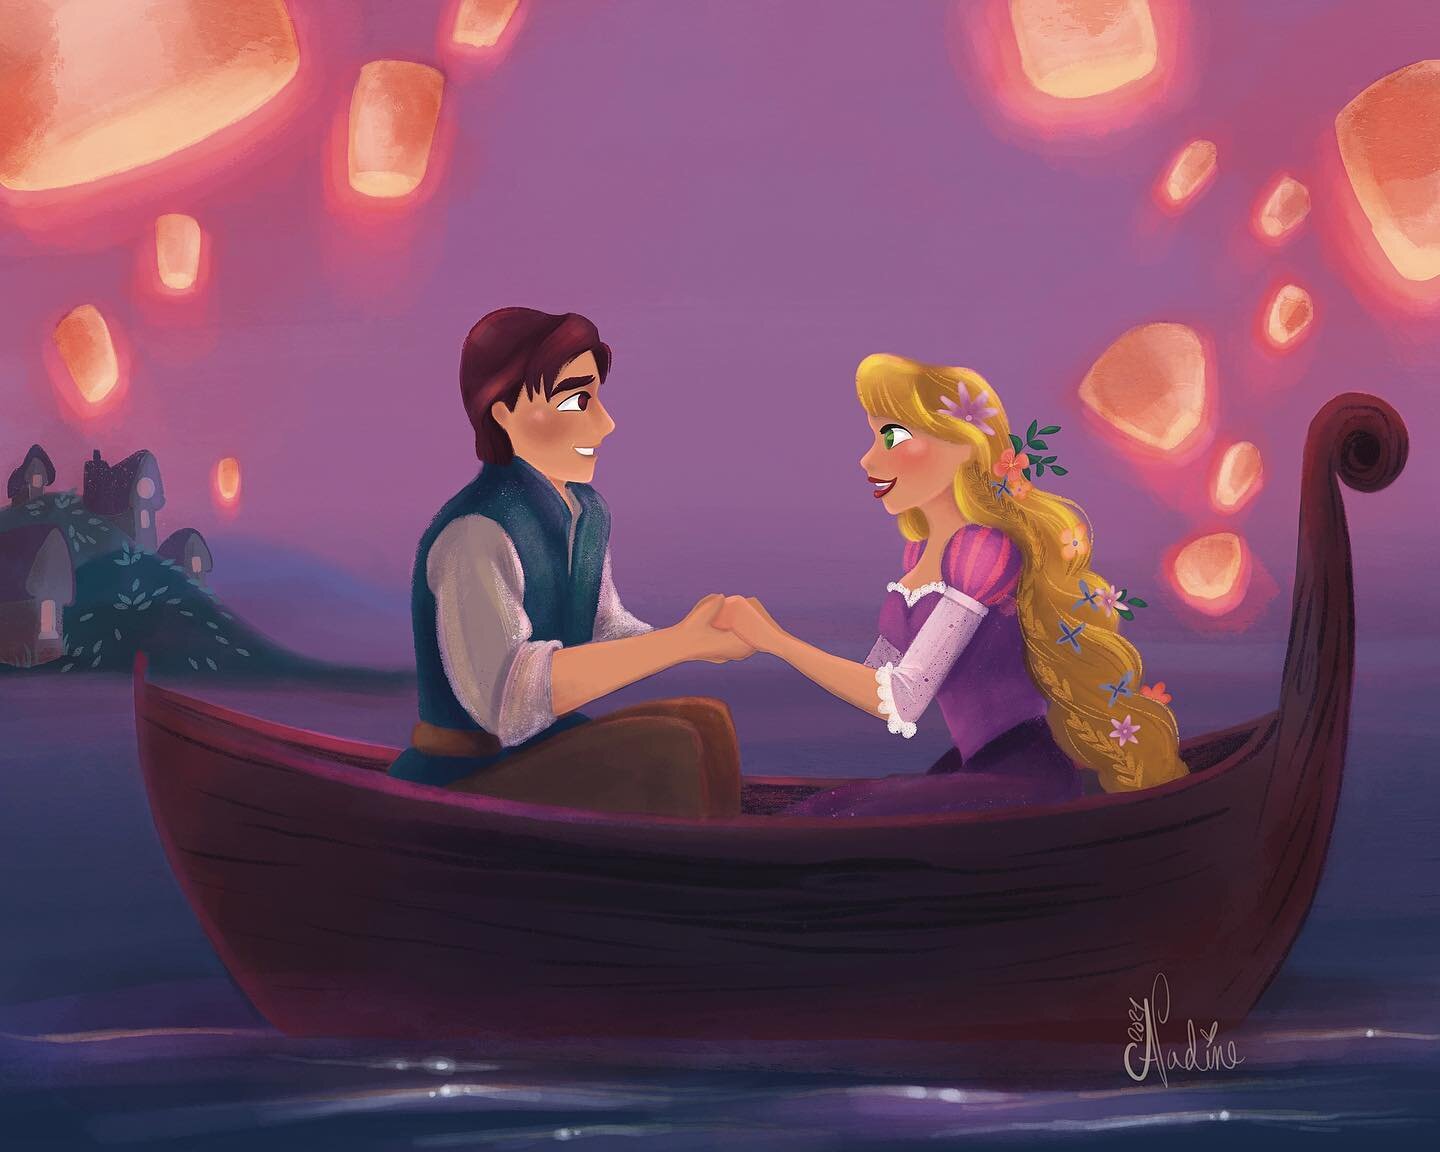 Eugenie &amp; Raps!
🌻 
I&rsquo;m starting to have a posting pattern which is good makes me look structured and organised 😂 😝 
🌸 
🌻 
Another Disney boat ride scene which is also influenced by the art of Brittney Lee! 
#nadineaydinart #disneytangl